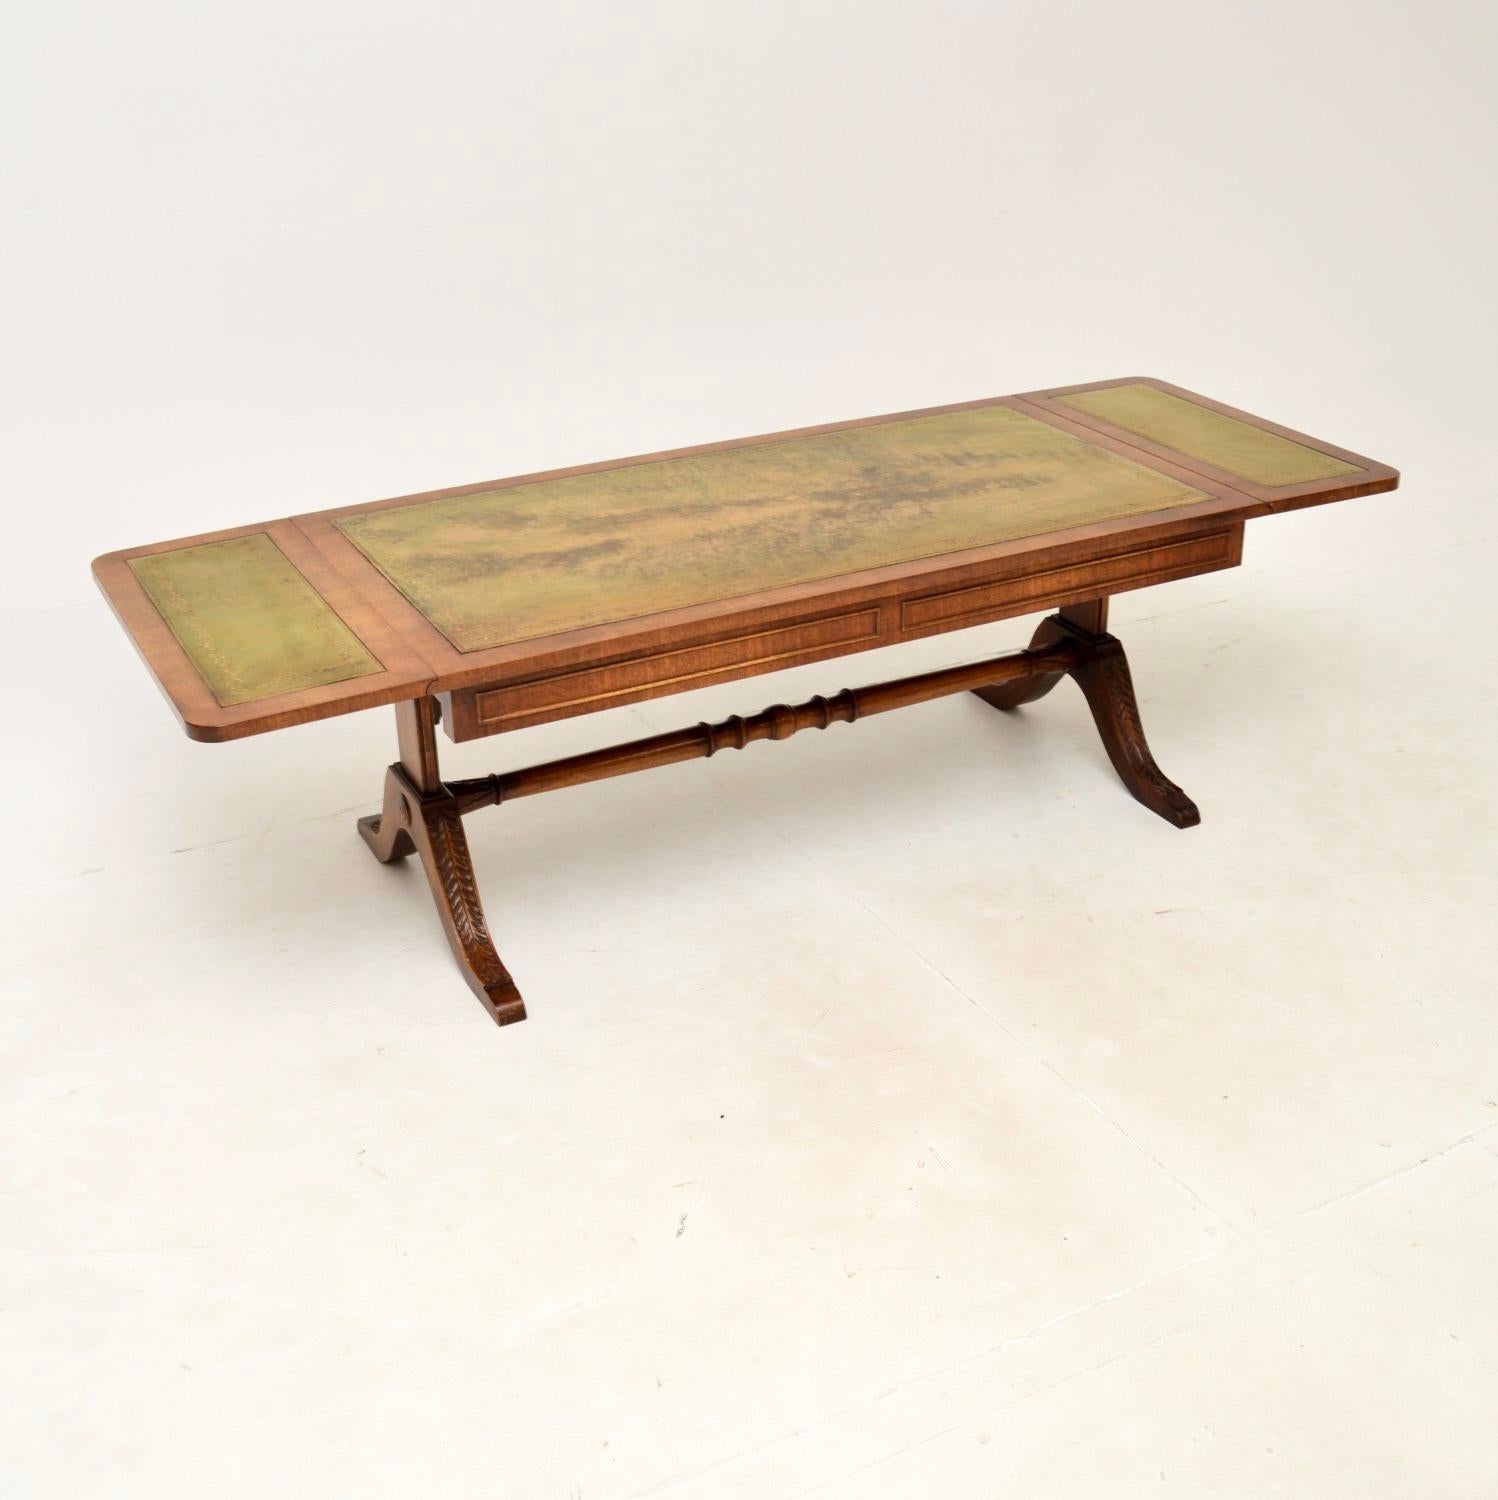 A wonderful antique drop leaf coffee table, made in England and dating from around the 1930-50’s.

This is of superb quality and has a very useful design. It sits on a stretchered base with carved feet, the top has beautiful inset tooled leather.